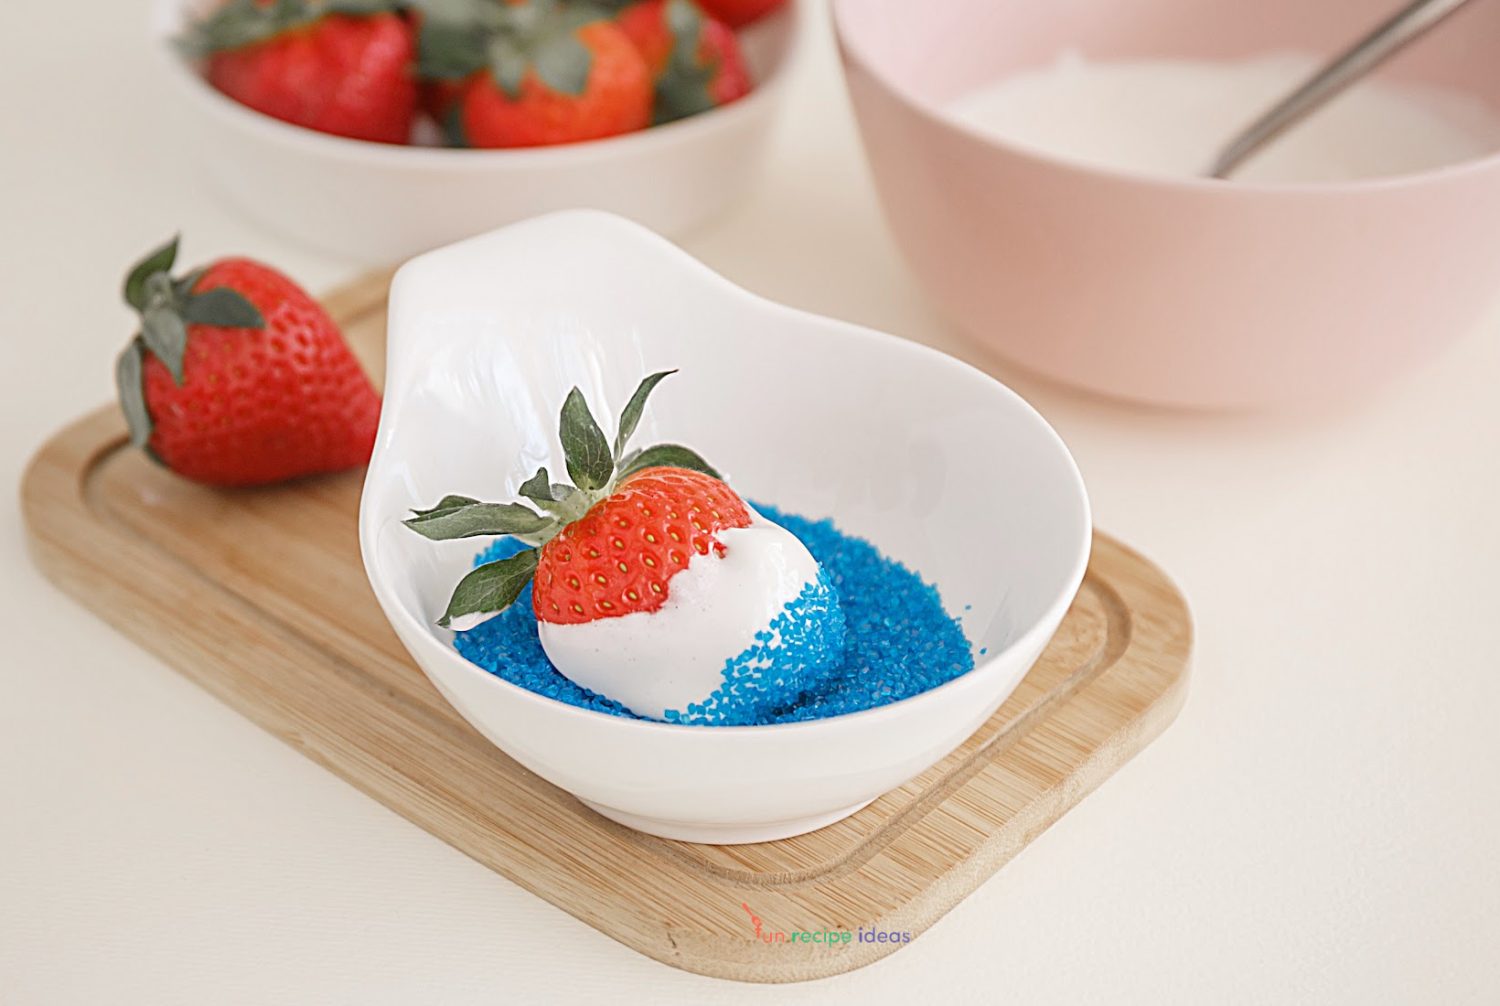 marshmallow dipped strawberry being pressed into blue colored sugar.